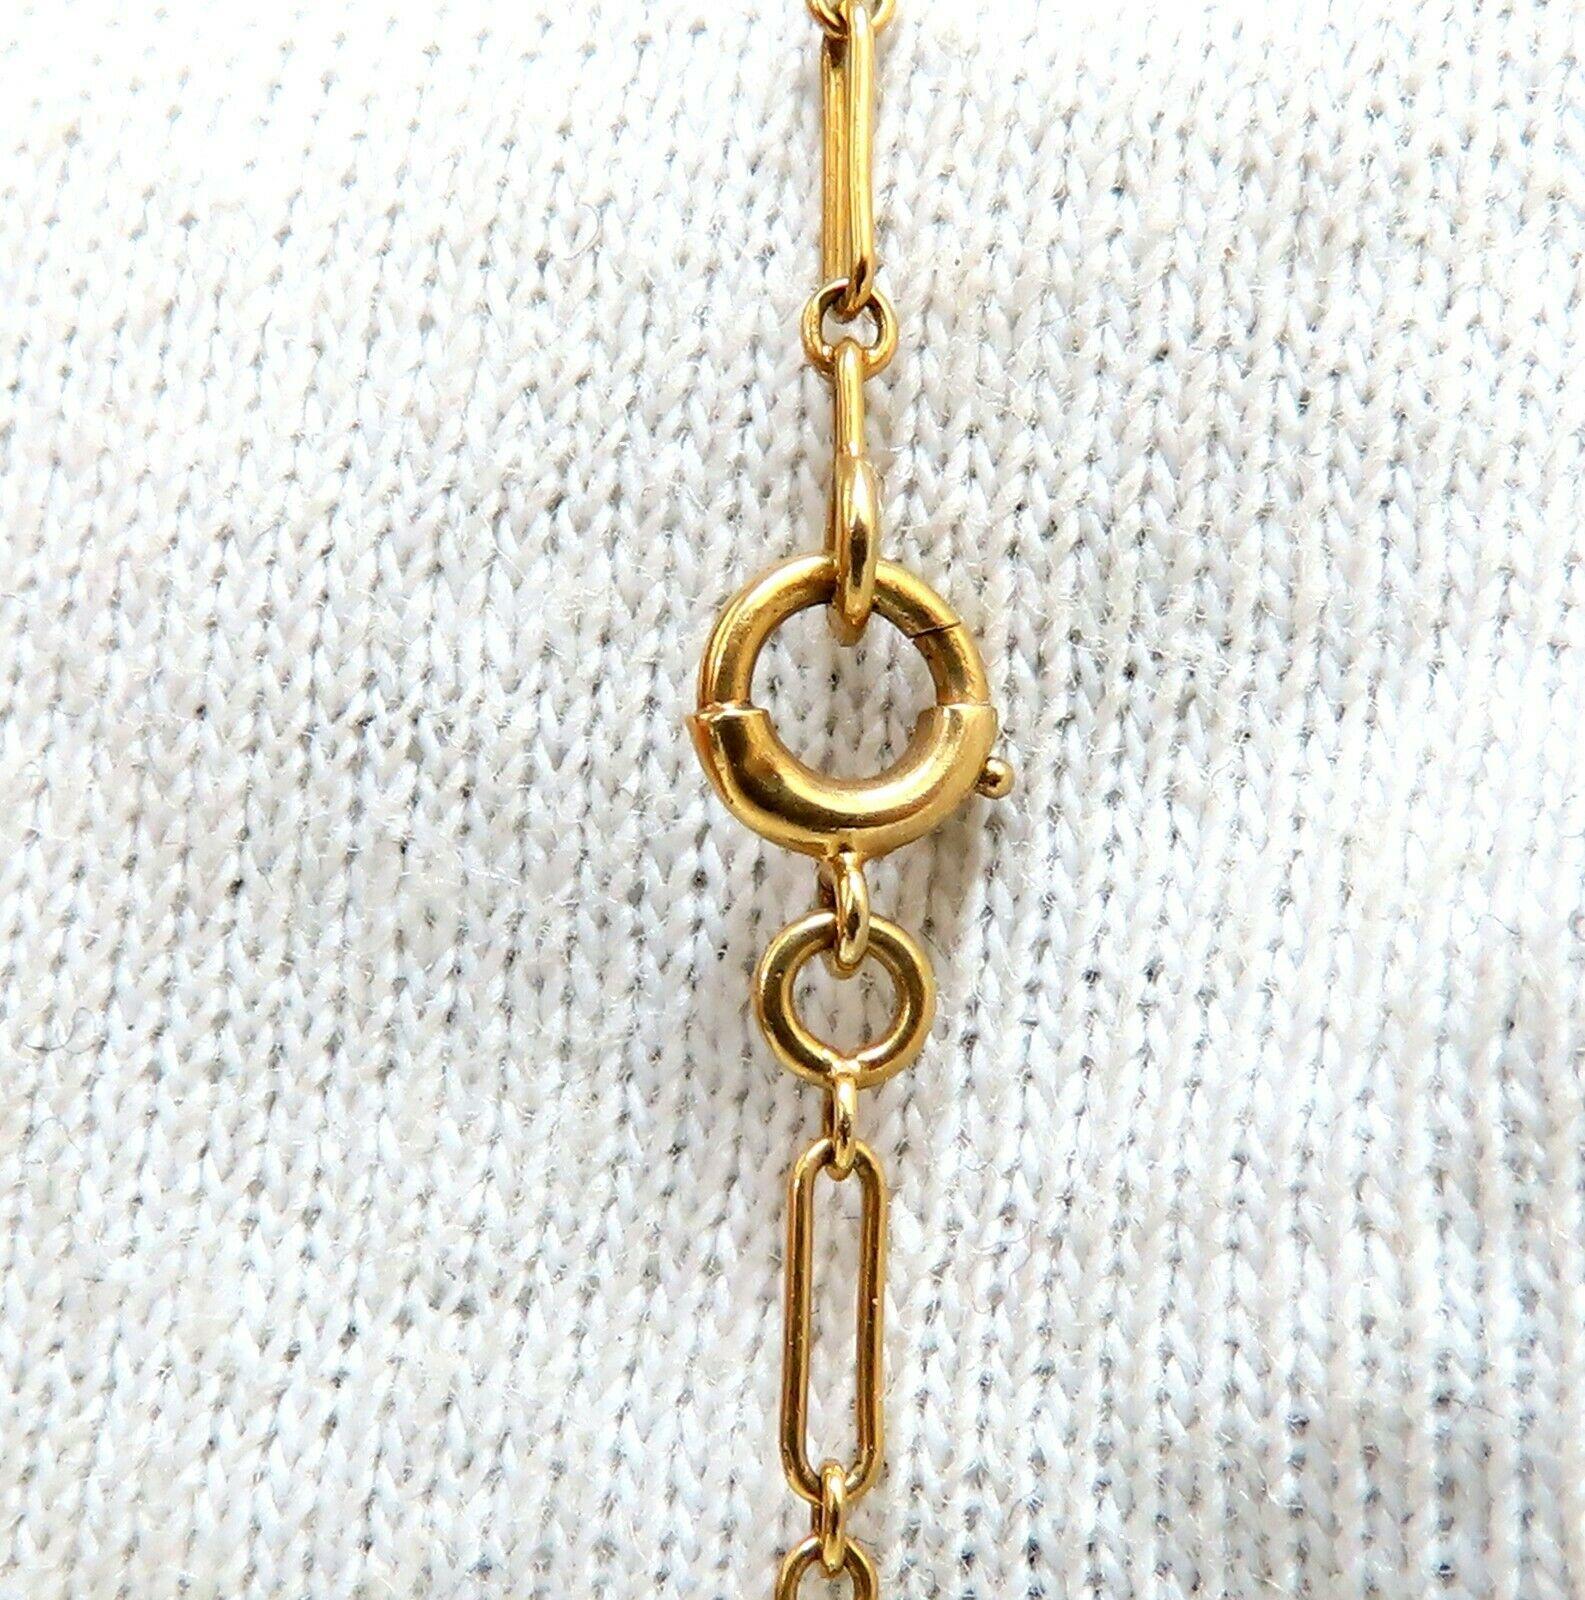 Egyptian Hieroglyphic Necklace

24 Inches (wearable length)

4.5 inches center drop

14kt. yellow gold 

9 Grams.

pendant measures: 23 x 10.5mm